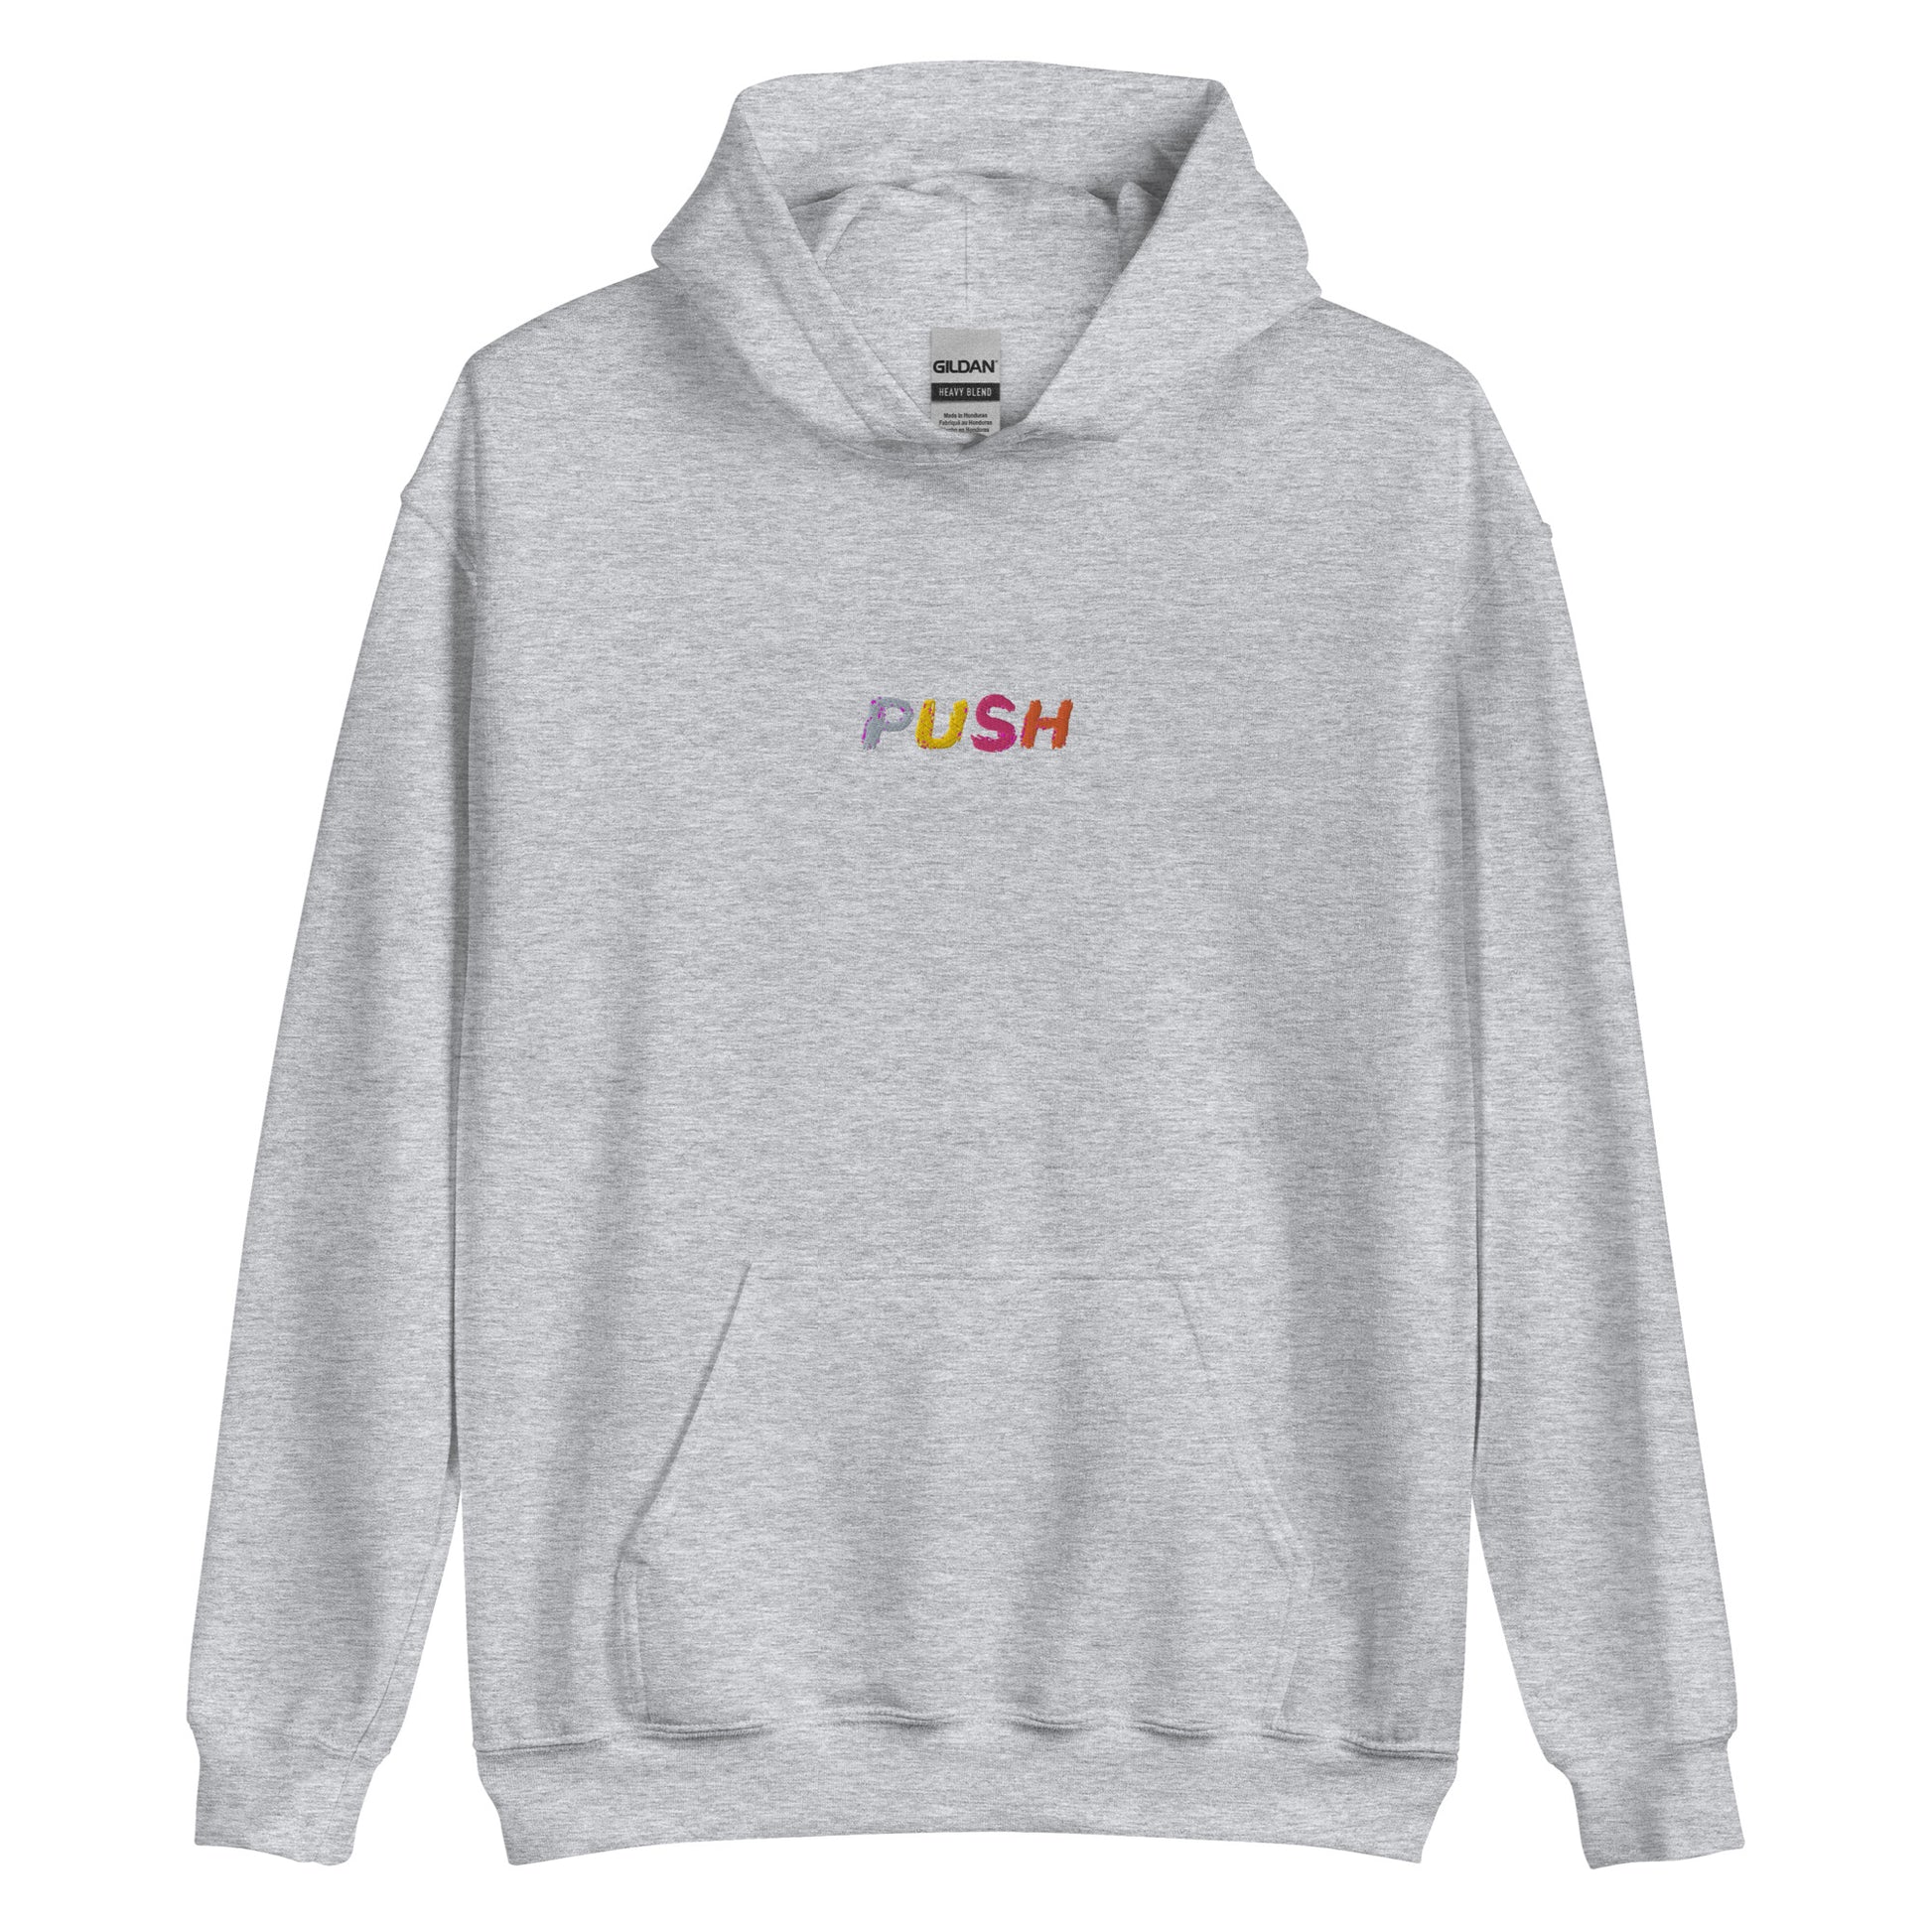 PUSH Embroidered Hoodie - grey / S - Shirts & Tops